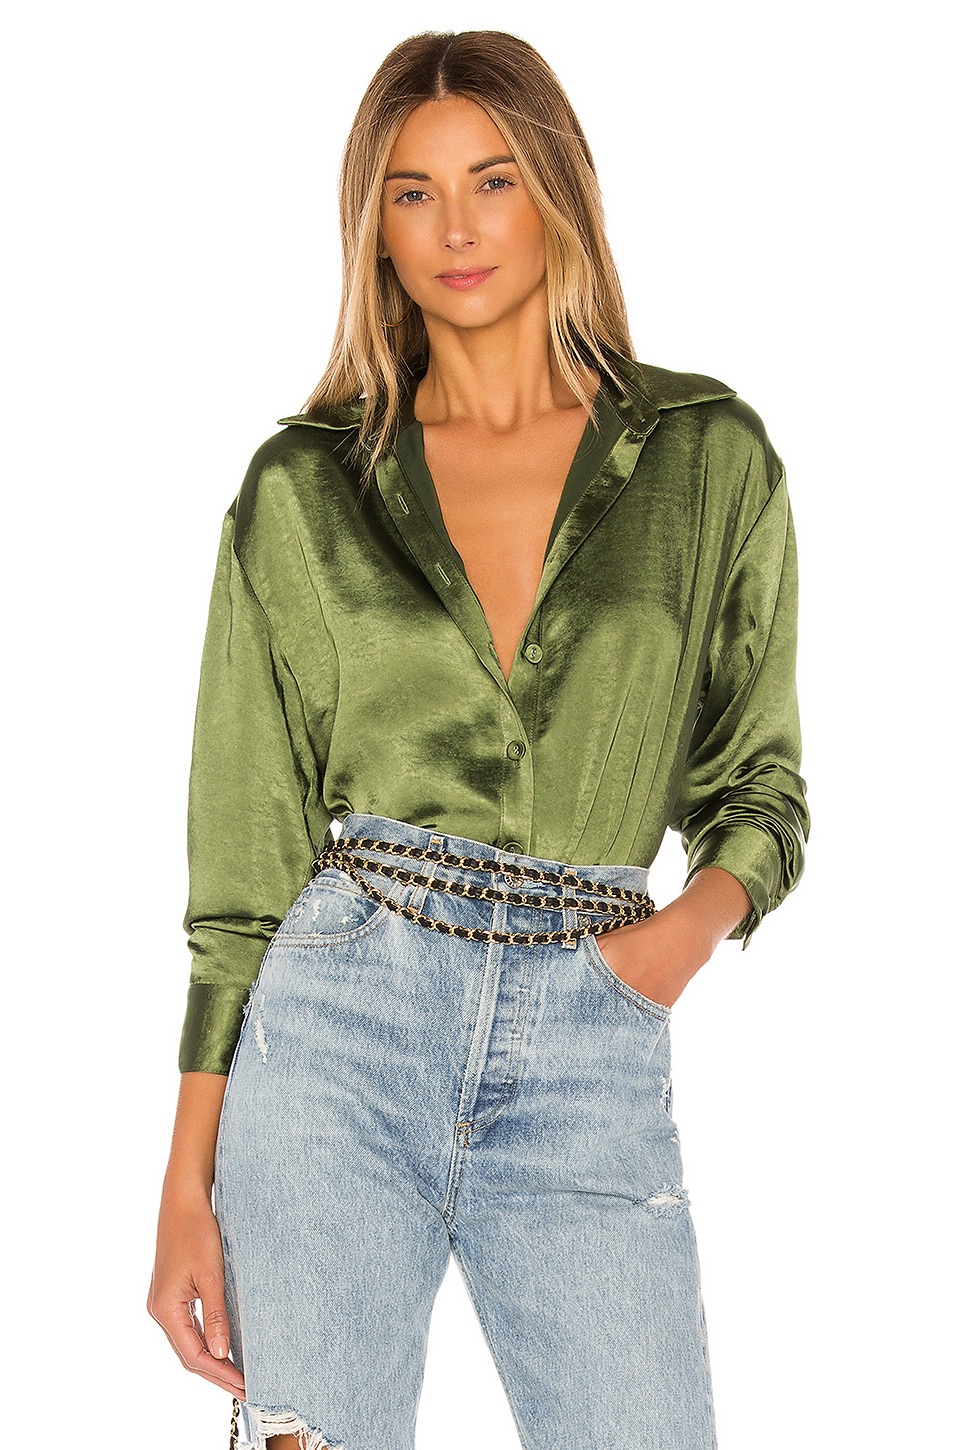 Lovers and Friends Salina Top in Olive Green | REVOLVE